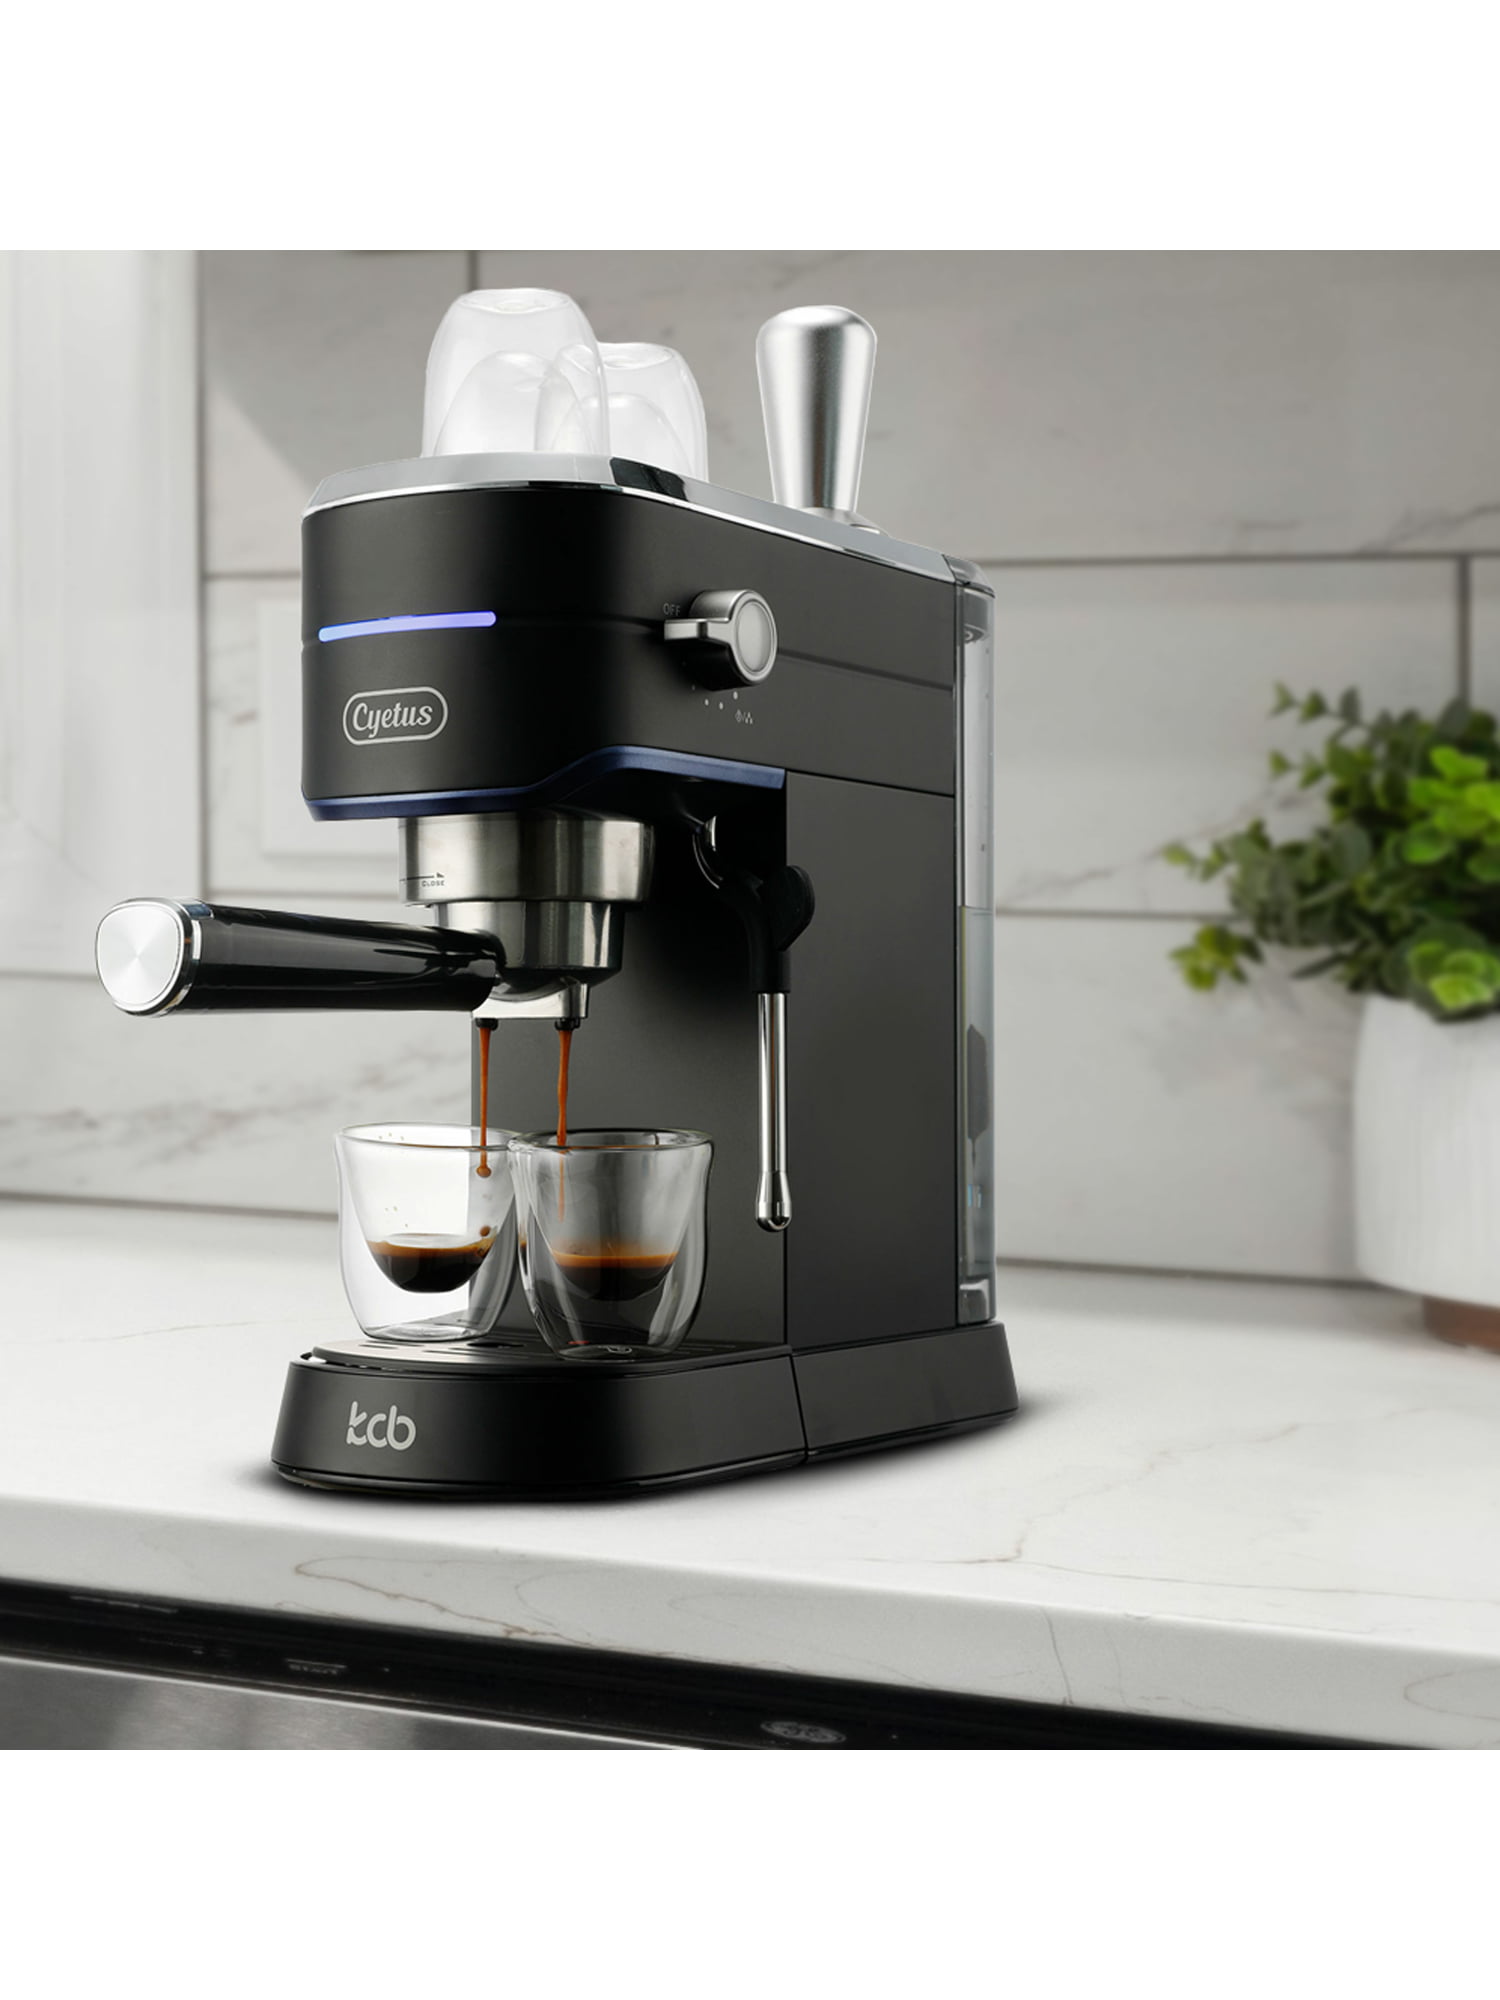 Cyetus Black Espresso Machine for At Home Use With Milk Steam Frother Wand  And Electric Coffee Bean Grinder With Removable Stainless Steel Bowl